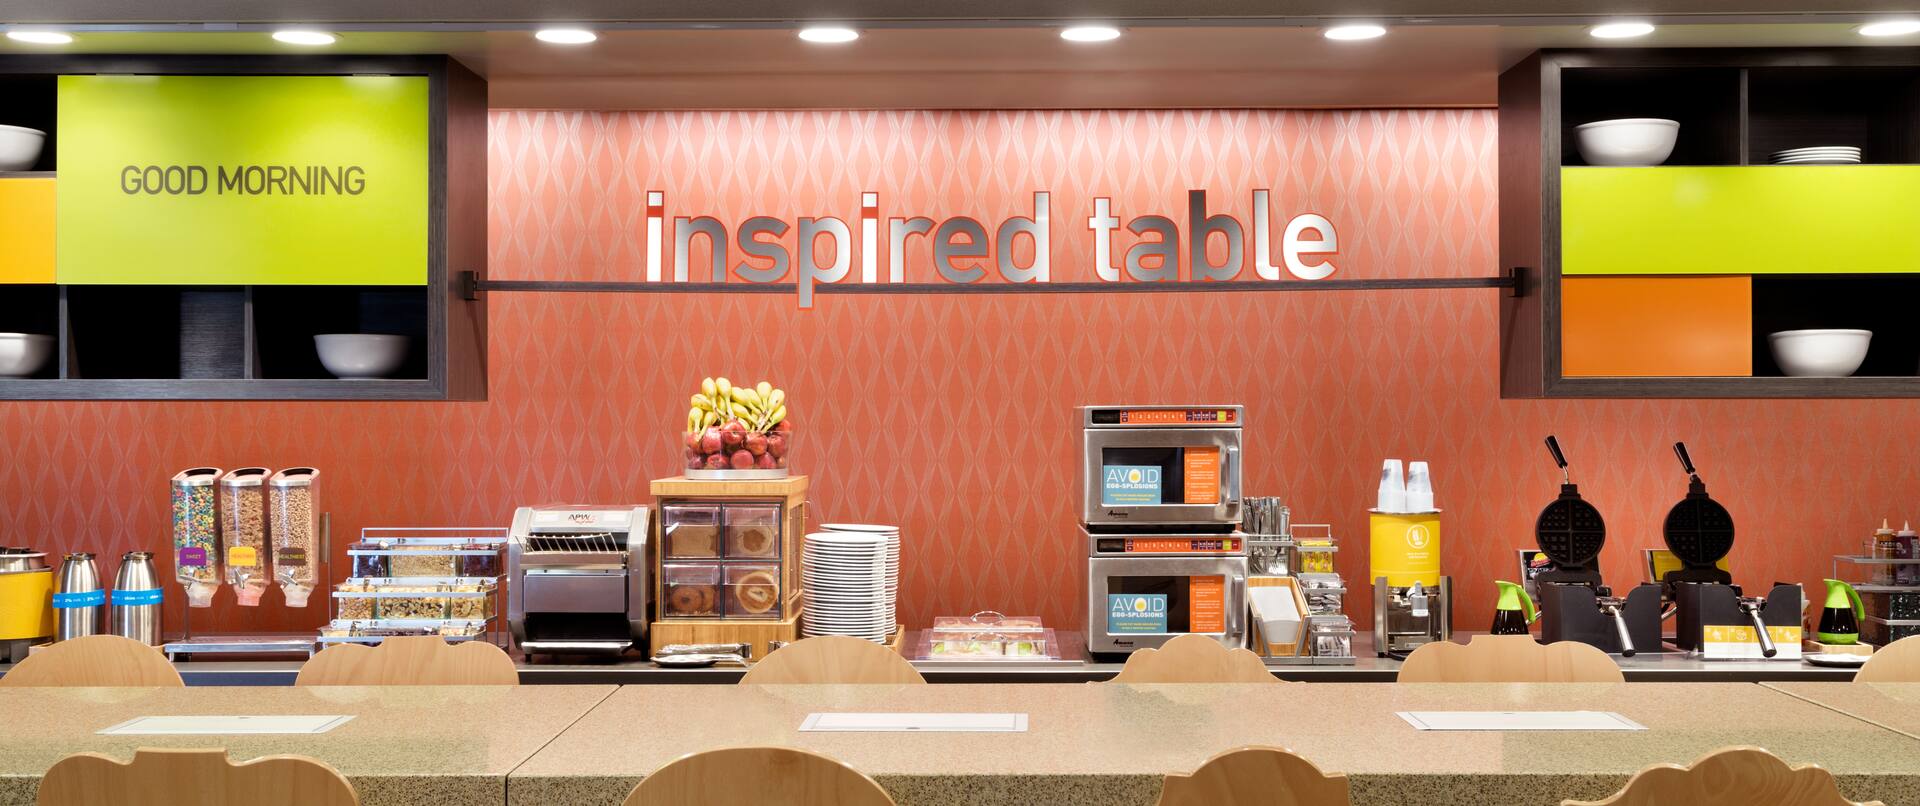 Brightly Lit Signage Above Food Service Area and Seating at a Community Table in Breakfast Dining Area